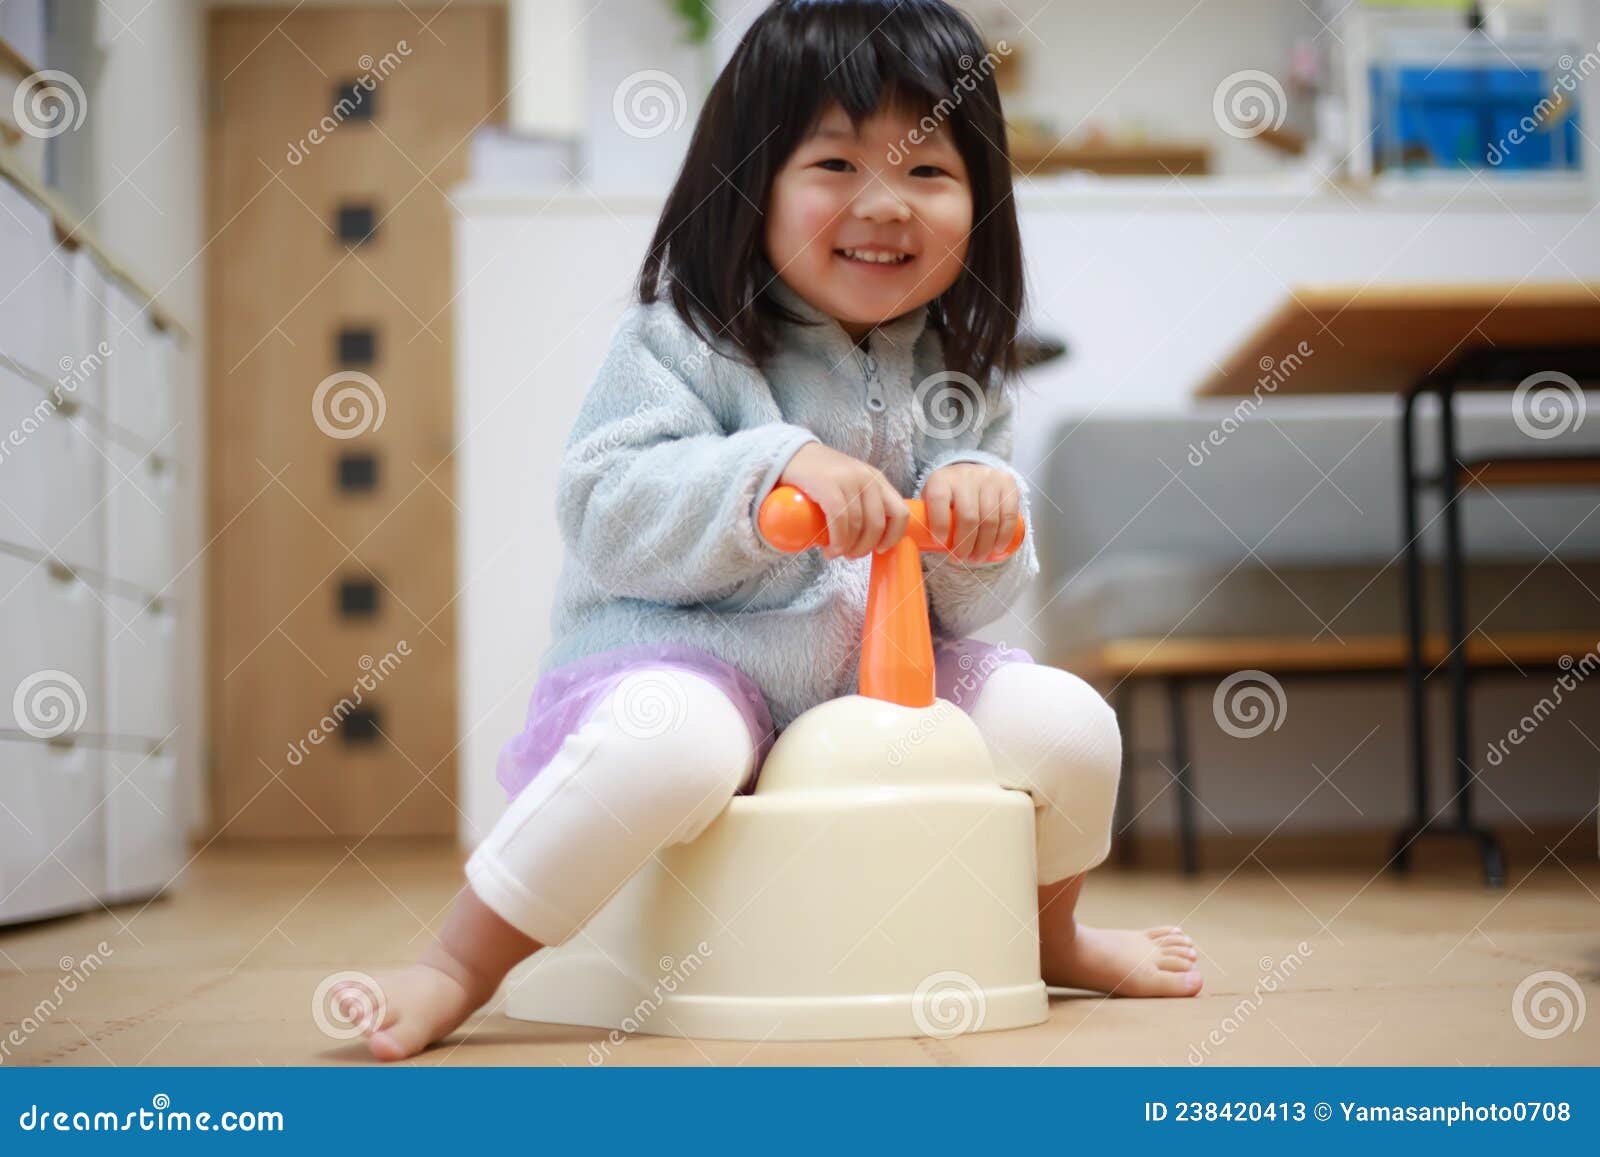 Image of a Girl Training in the Toilet Stock Image - Image of indoors ...